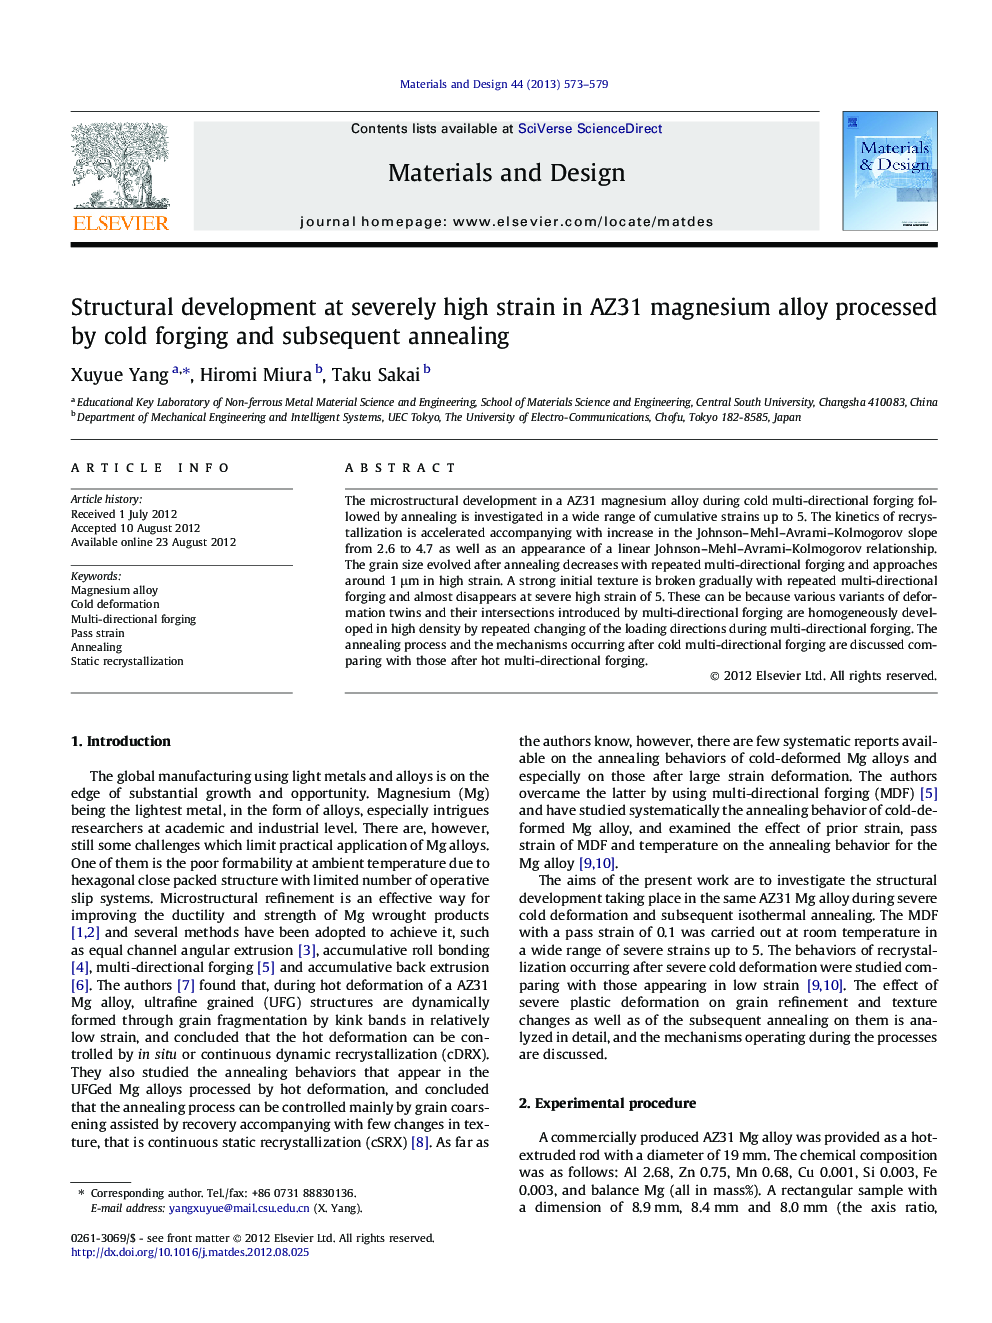 Structural development at severely high strain in AZ31 magnesium alloy processed by cold forging and subsequent annealing